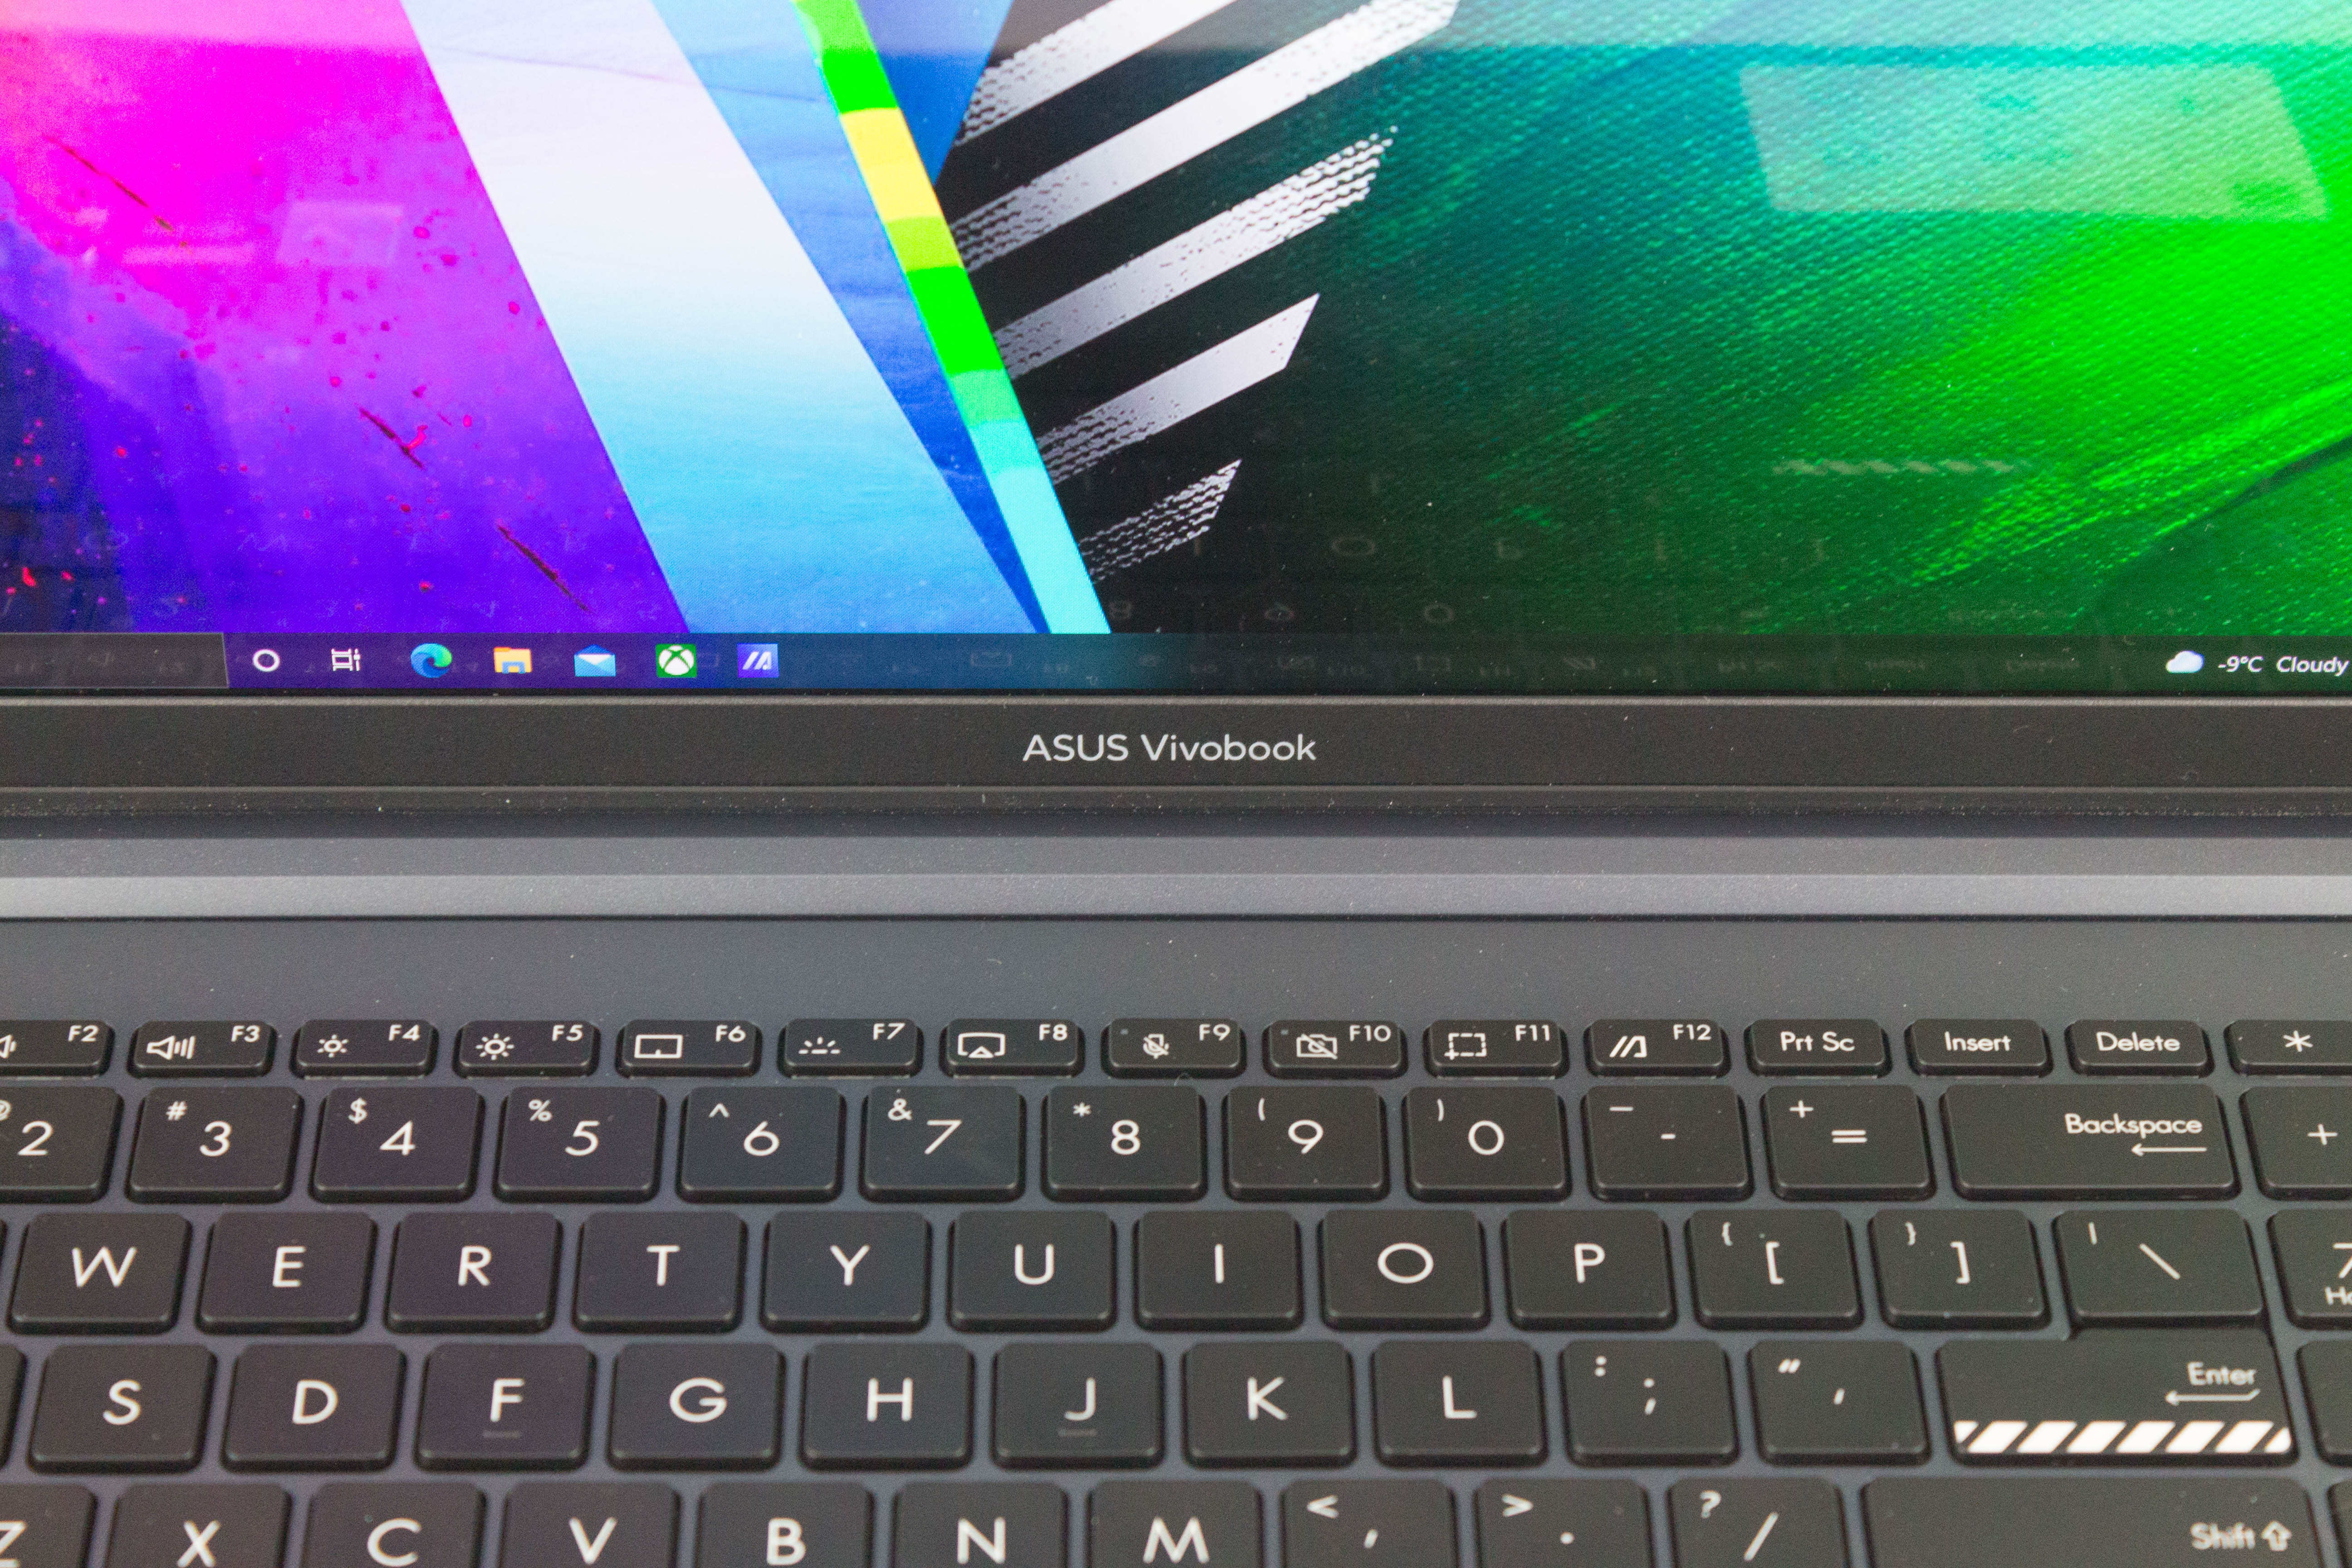 Final Words - The ASUS Vivobook Pro 15 OLED Review: For The